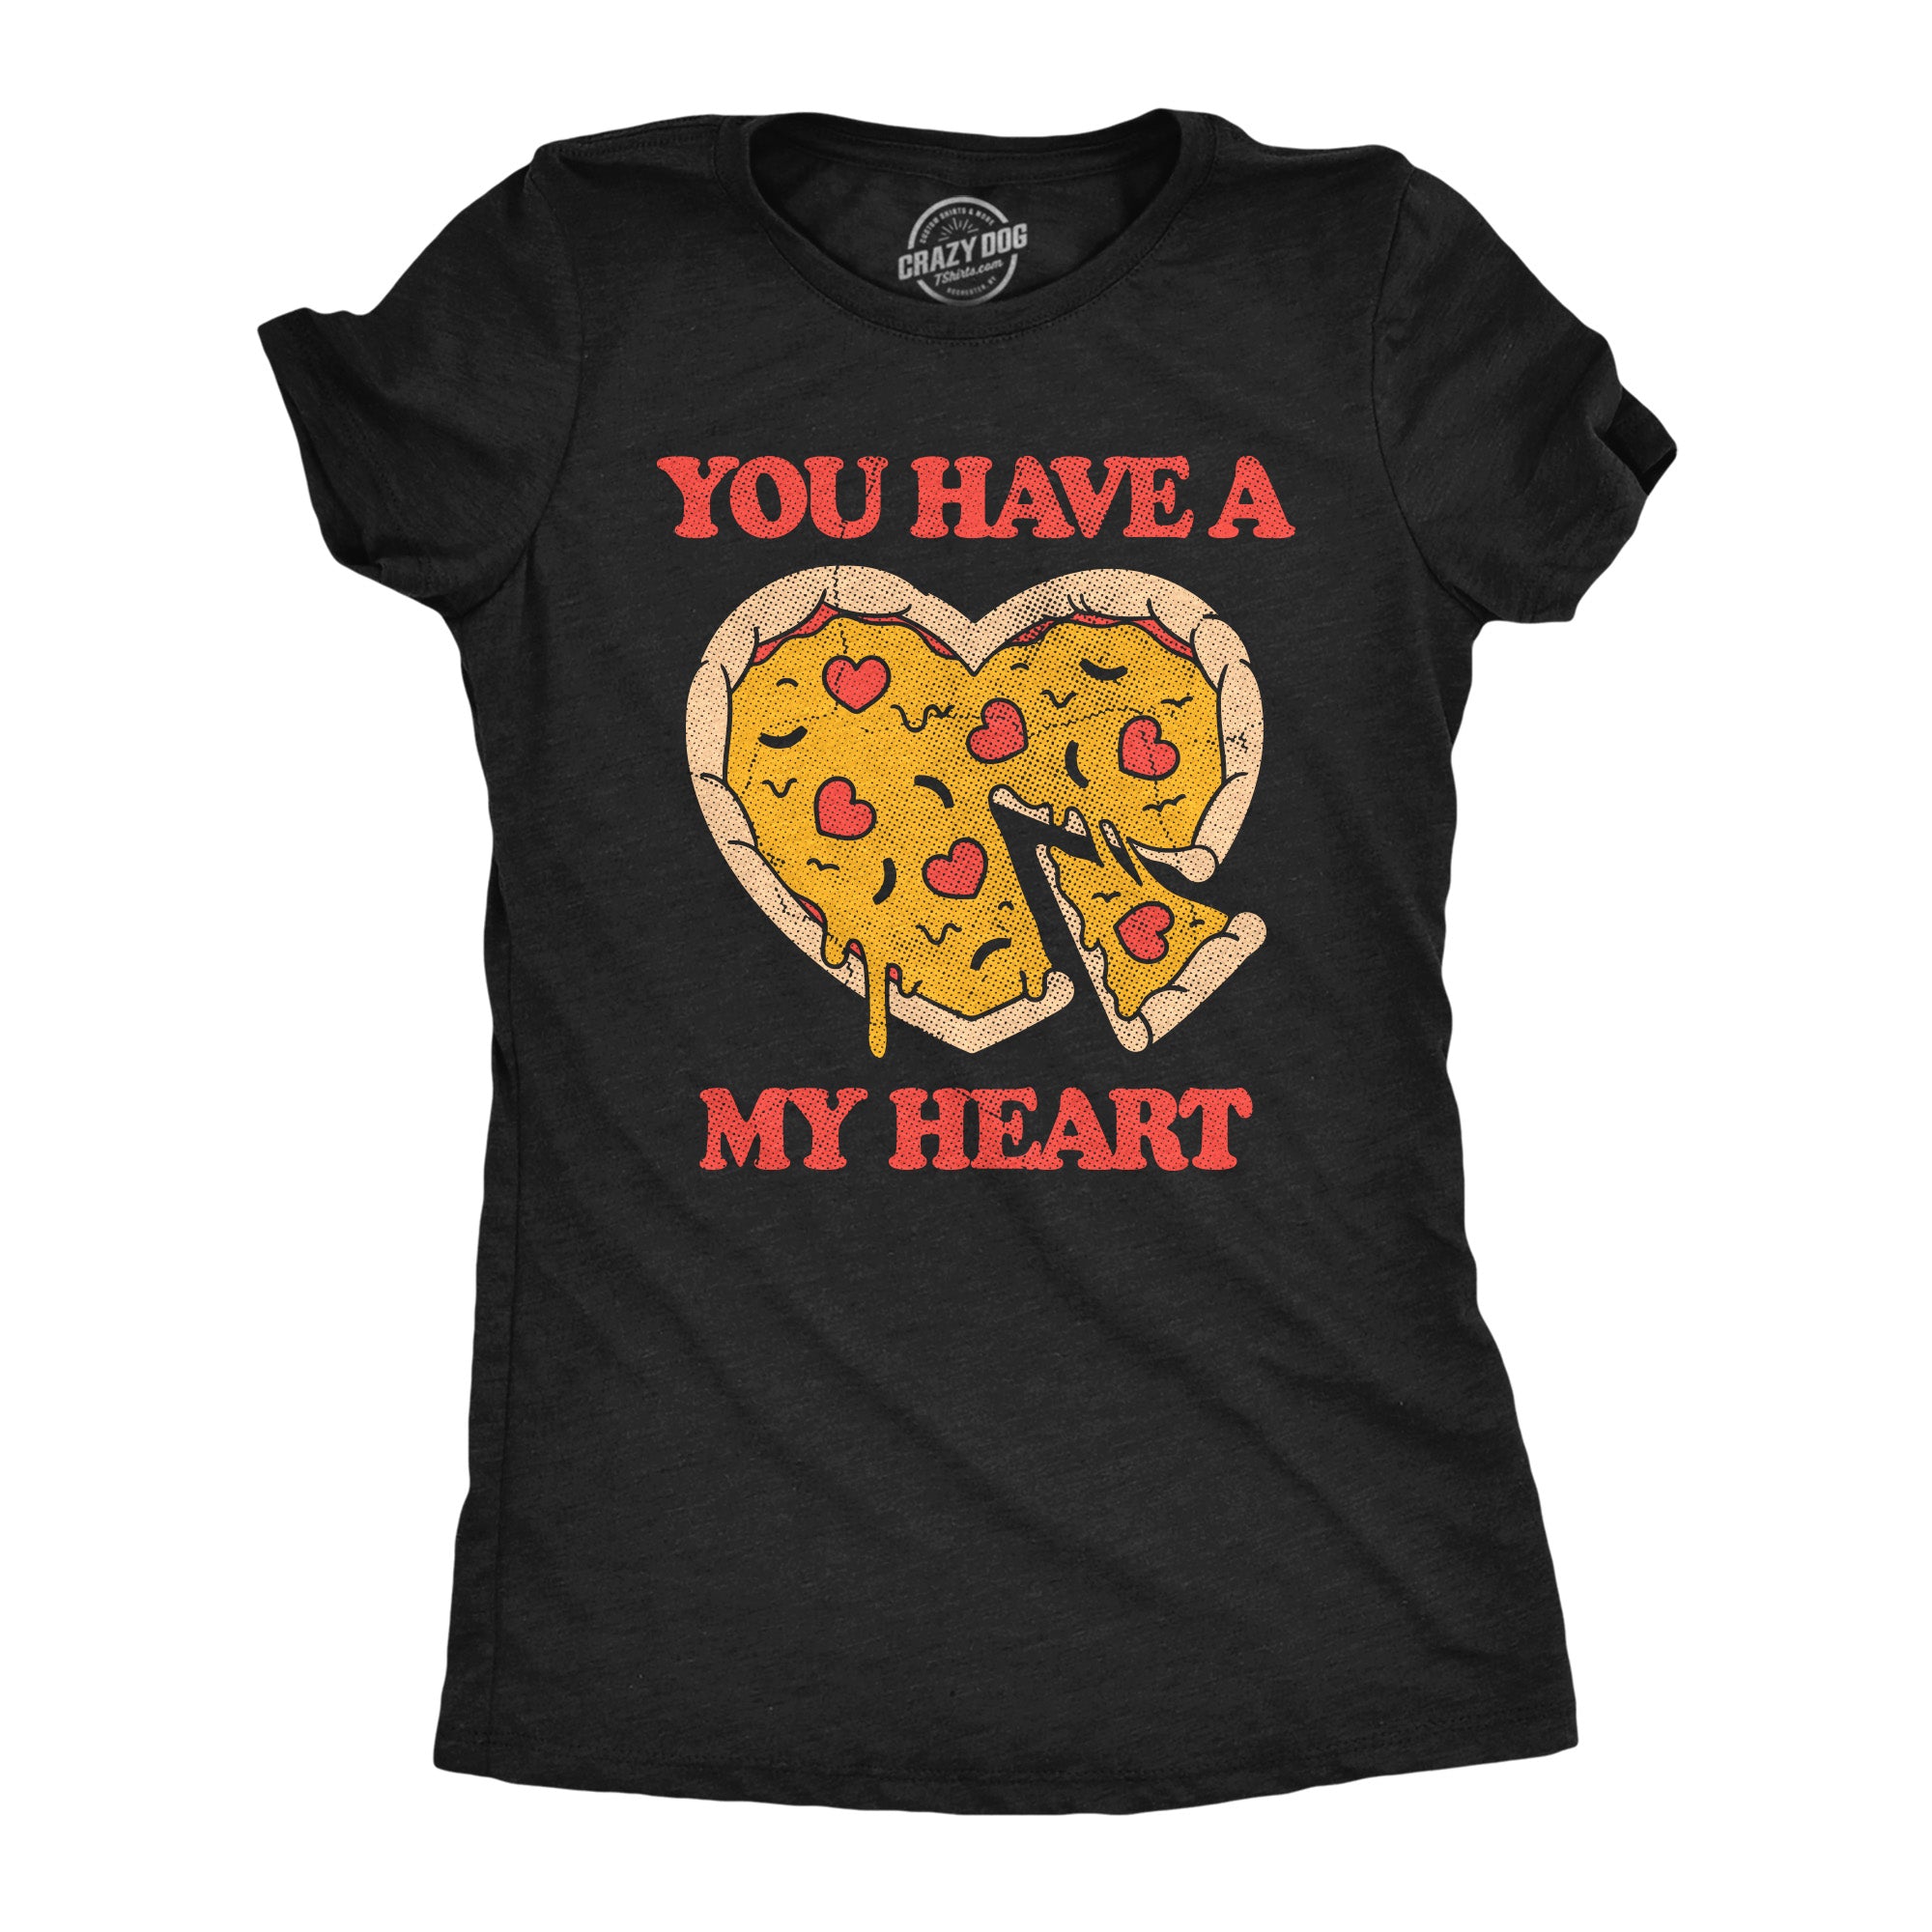 Funny Heather Black - You Have A Pizza My Heart You Have A Pizza My Heart Womens T Shirt Nerdy Food sarcastic Tee